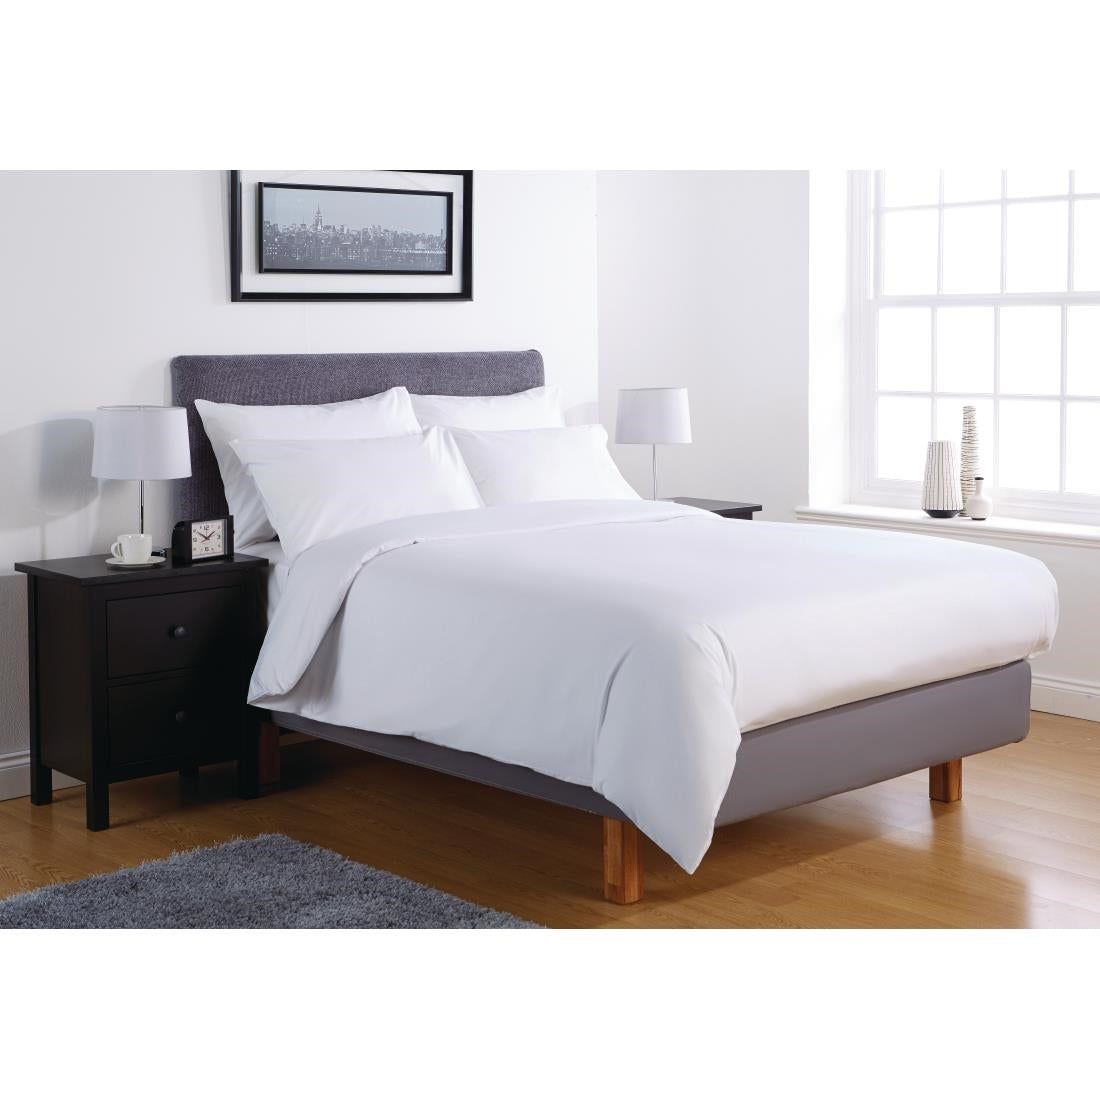 GT800 Mitre Comfort Percale Fitted Sheet White Double